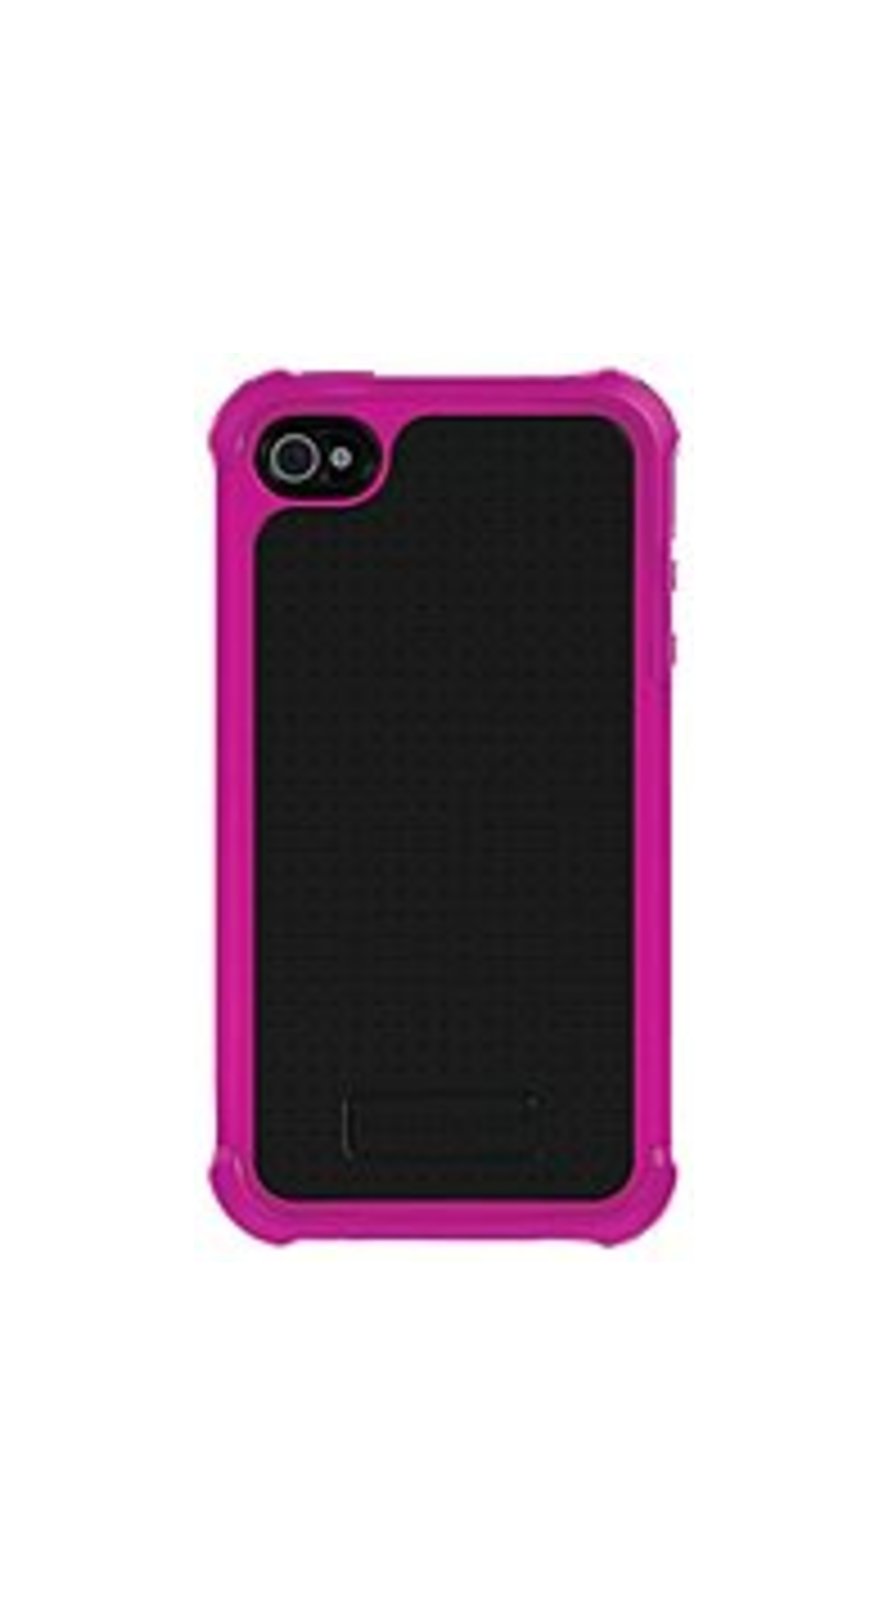 Ballistic SA0582-M965 Soft Gel Case for iPhone 4 and 4S - Pink, Black